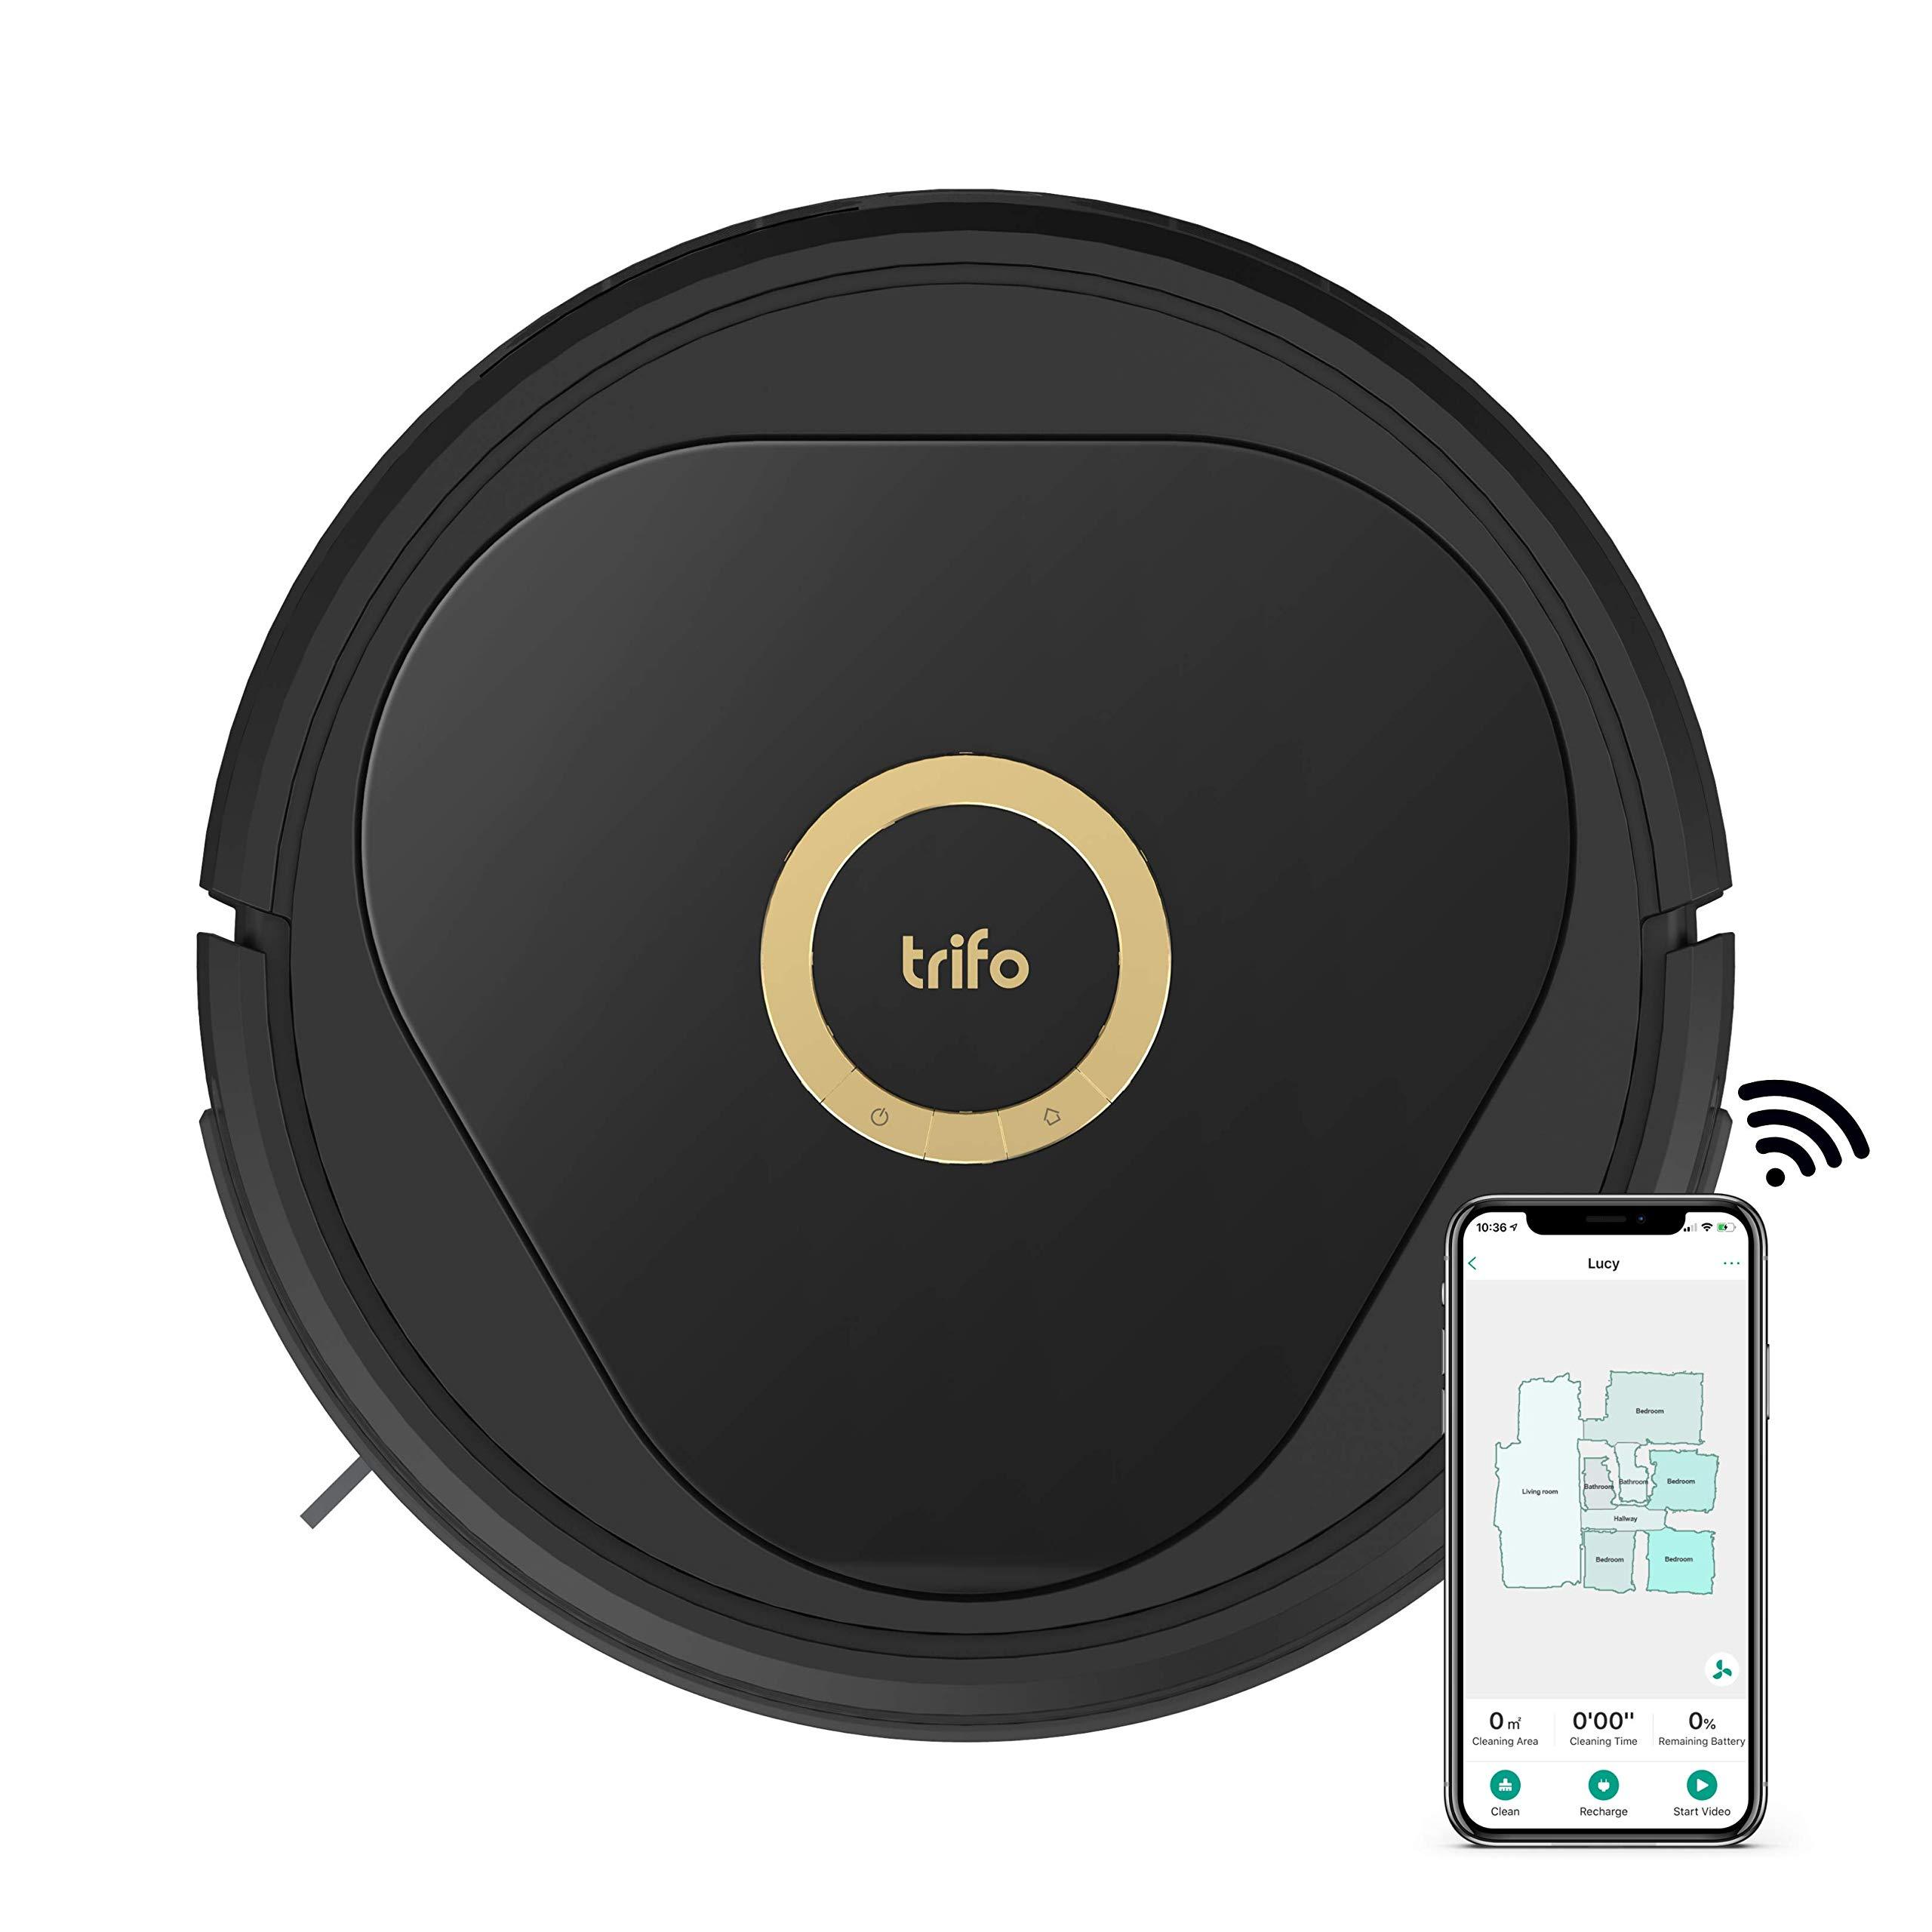 Trifo Lucy AI Home Robot Vacuum with 1080p Full HD Day & Night Vision, Video Recording, Smart Navigation and Mapping, Super Powerful, 3000Pa Suction, Obstacle Avoidance Down to 1", No-go Zones, Pet Hair - image 1 of 7